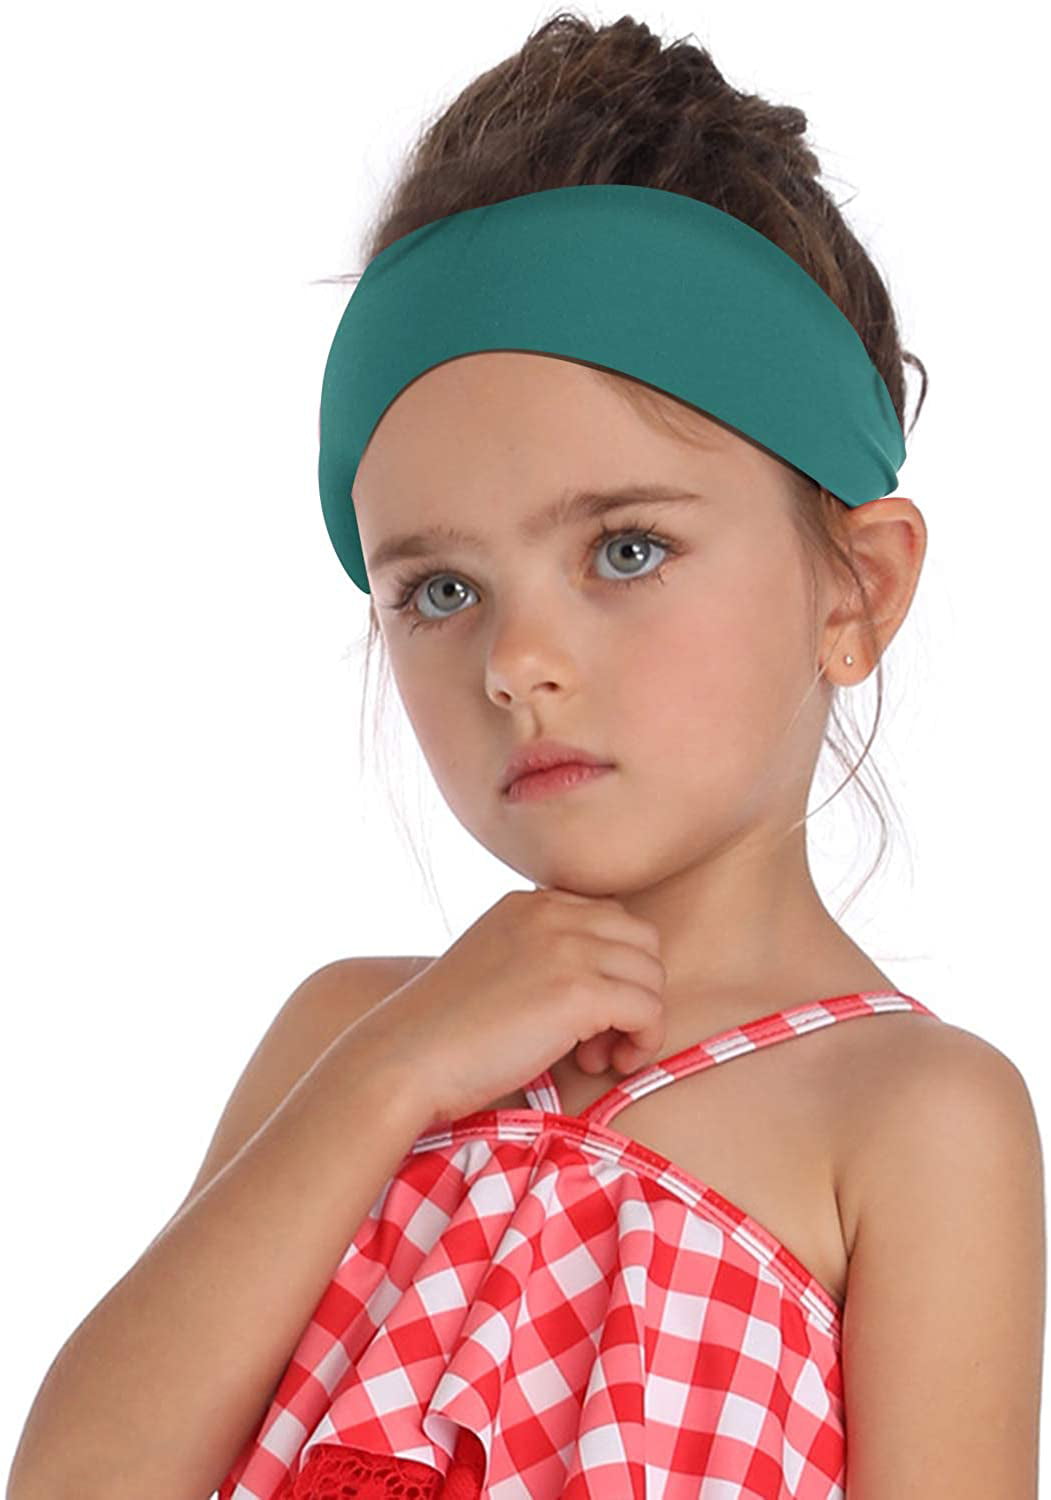 Kids Headbands Athletic Sweatbands Sports Headband for Girls and Boys Moisture Wicking Elastic Hairband for Toddler Children and Teenagers-Available in 2 Size 